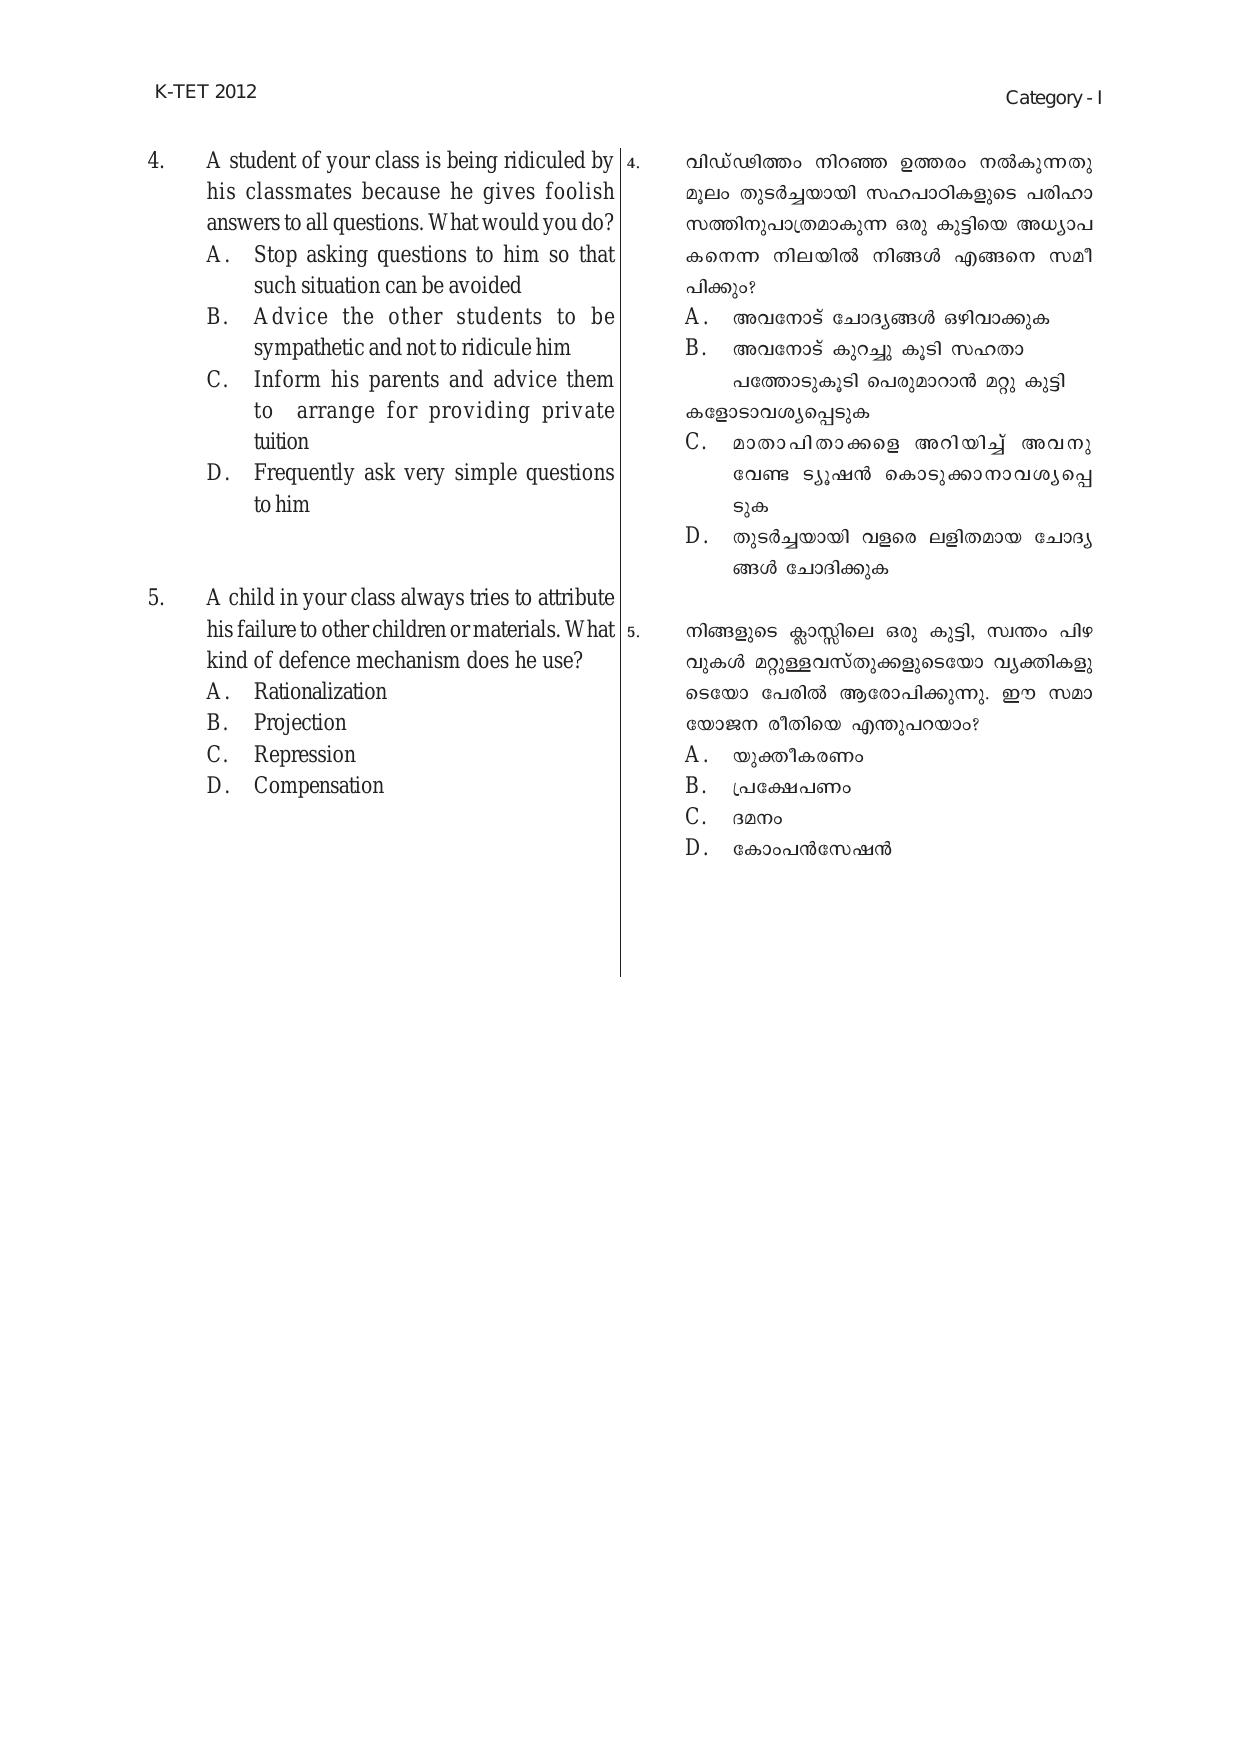 KTET Category 1 - Lower Primary Teacher (Class 1-5) Exam Old Papers - Page 4